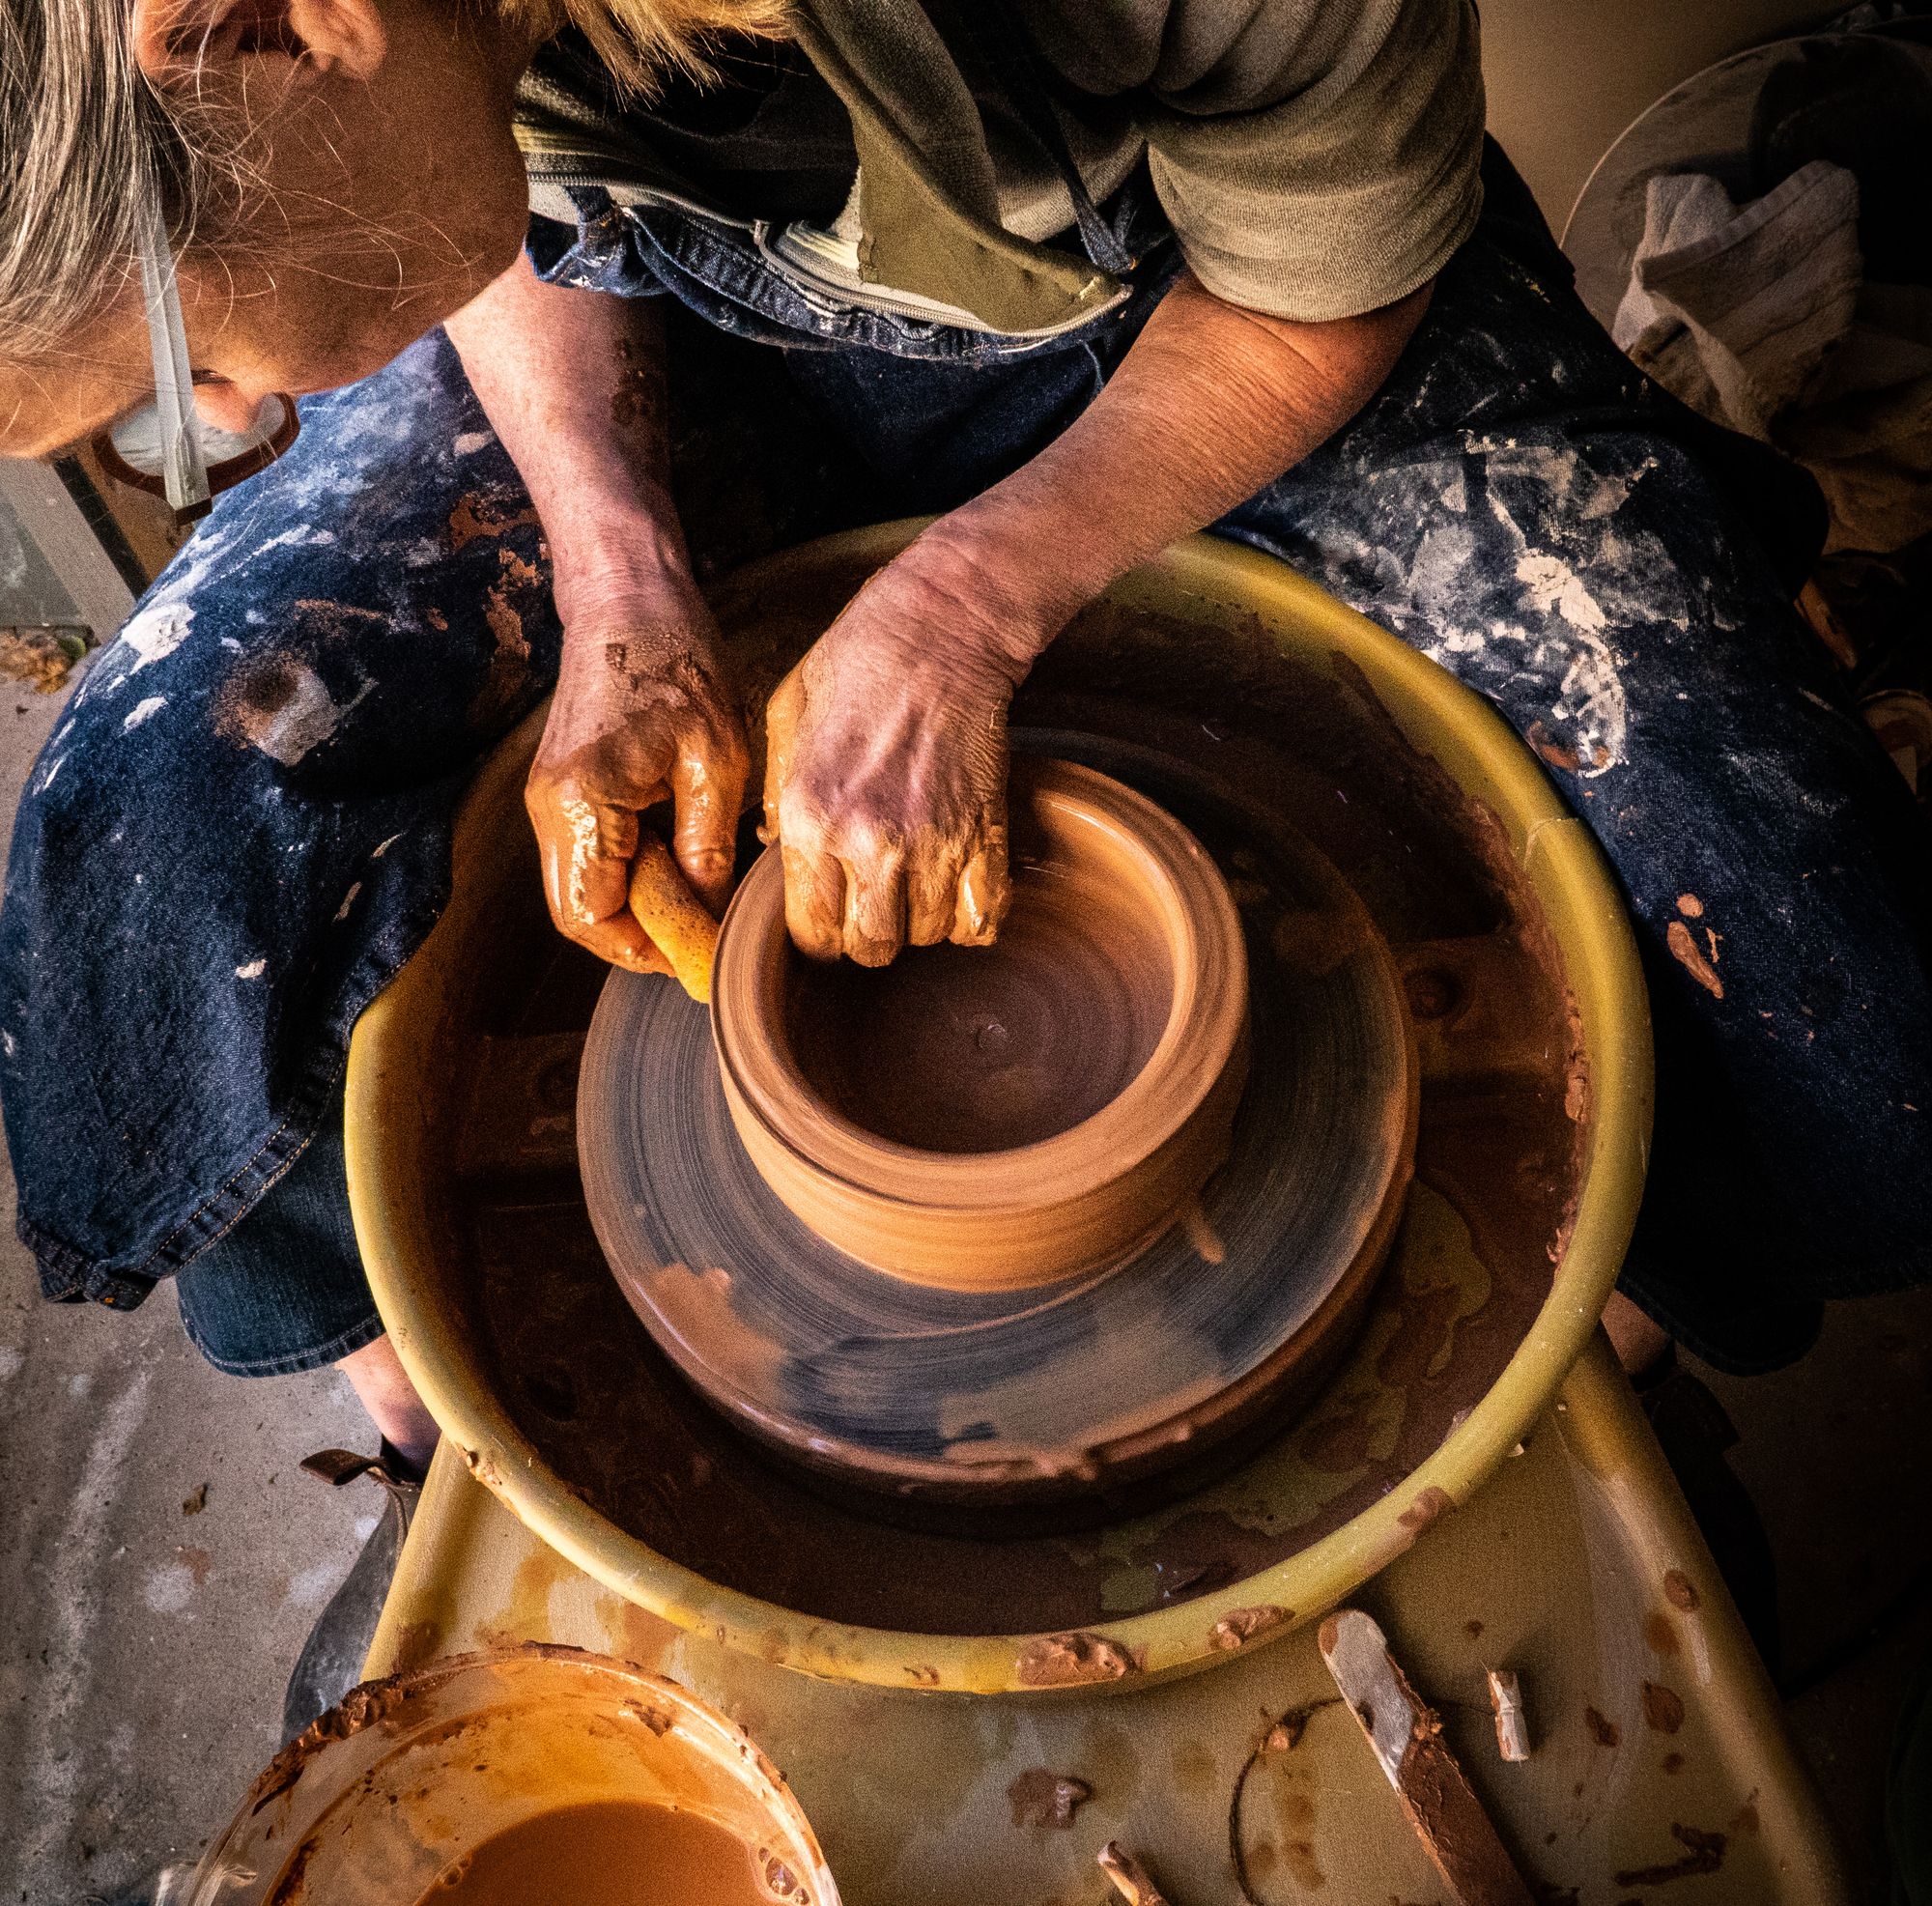 Image of a potter making a bowl on a pottery wheel